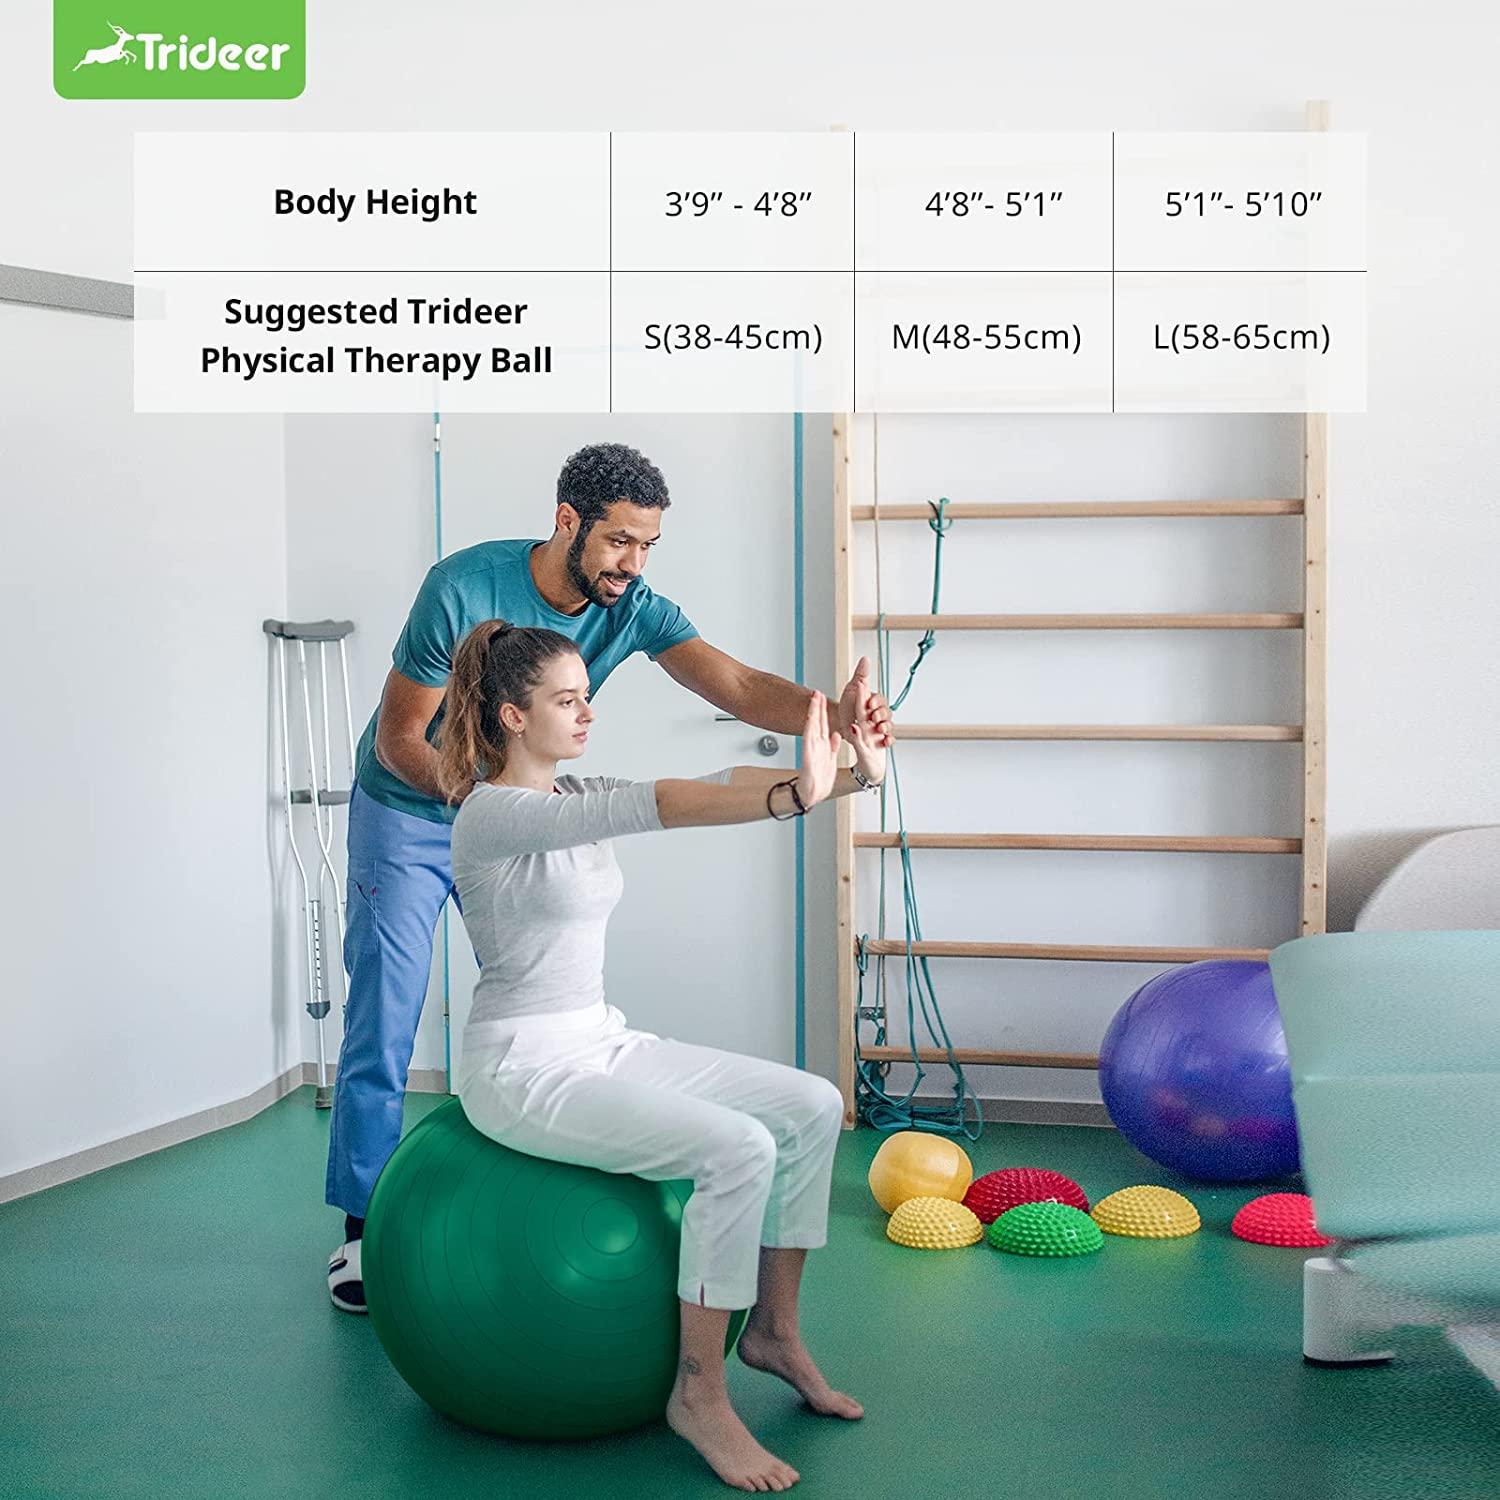 Trideer Exercise Ball for Physical Therapy Swiss Ball Physio Ball for Rehab Exercises  Workout Fitness Ball for Core Strength Yoga Ball for Balance Flexibility L  (23-26ines 58-65cm) Green